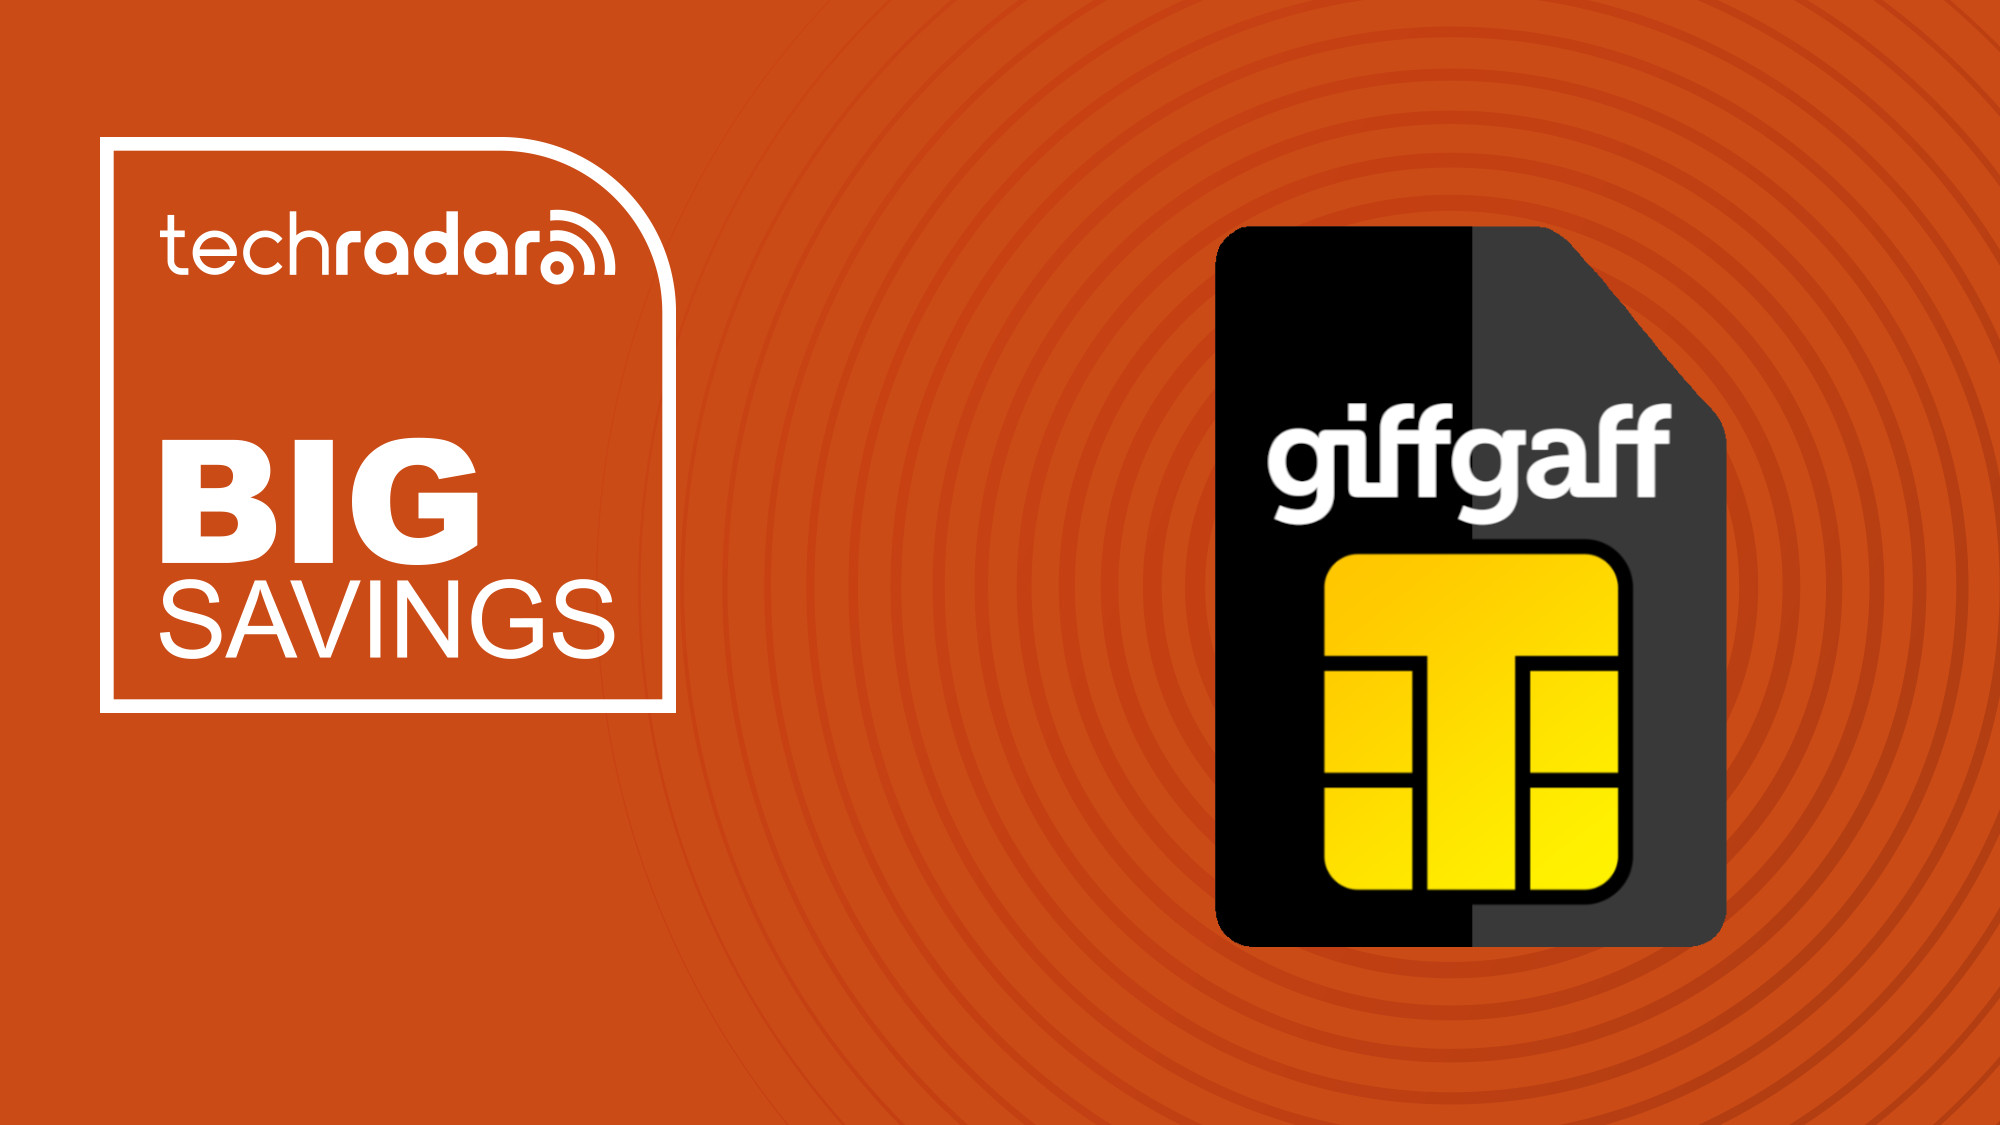 Students get 40GB of data for just £10 with this excellent GiffGaff SIM-only deal